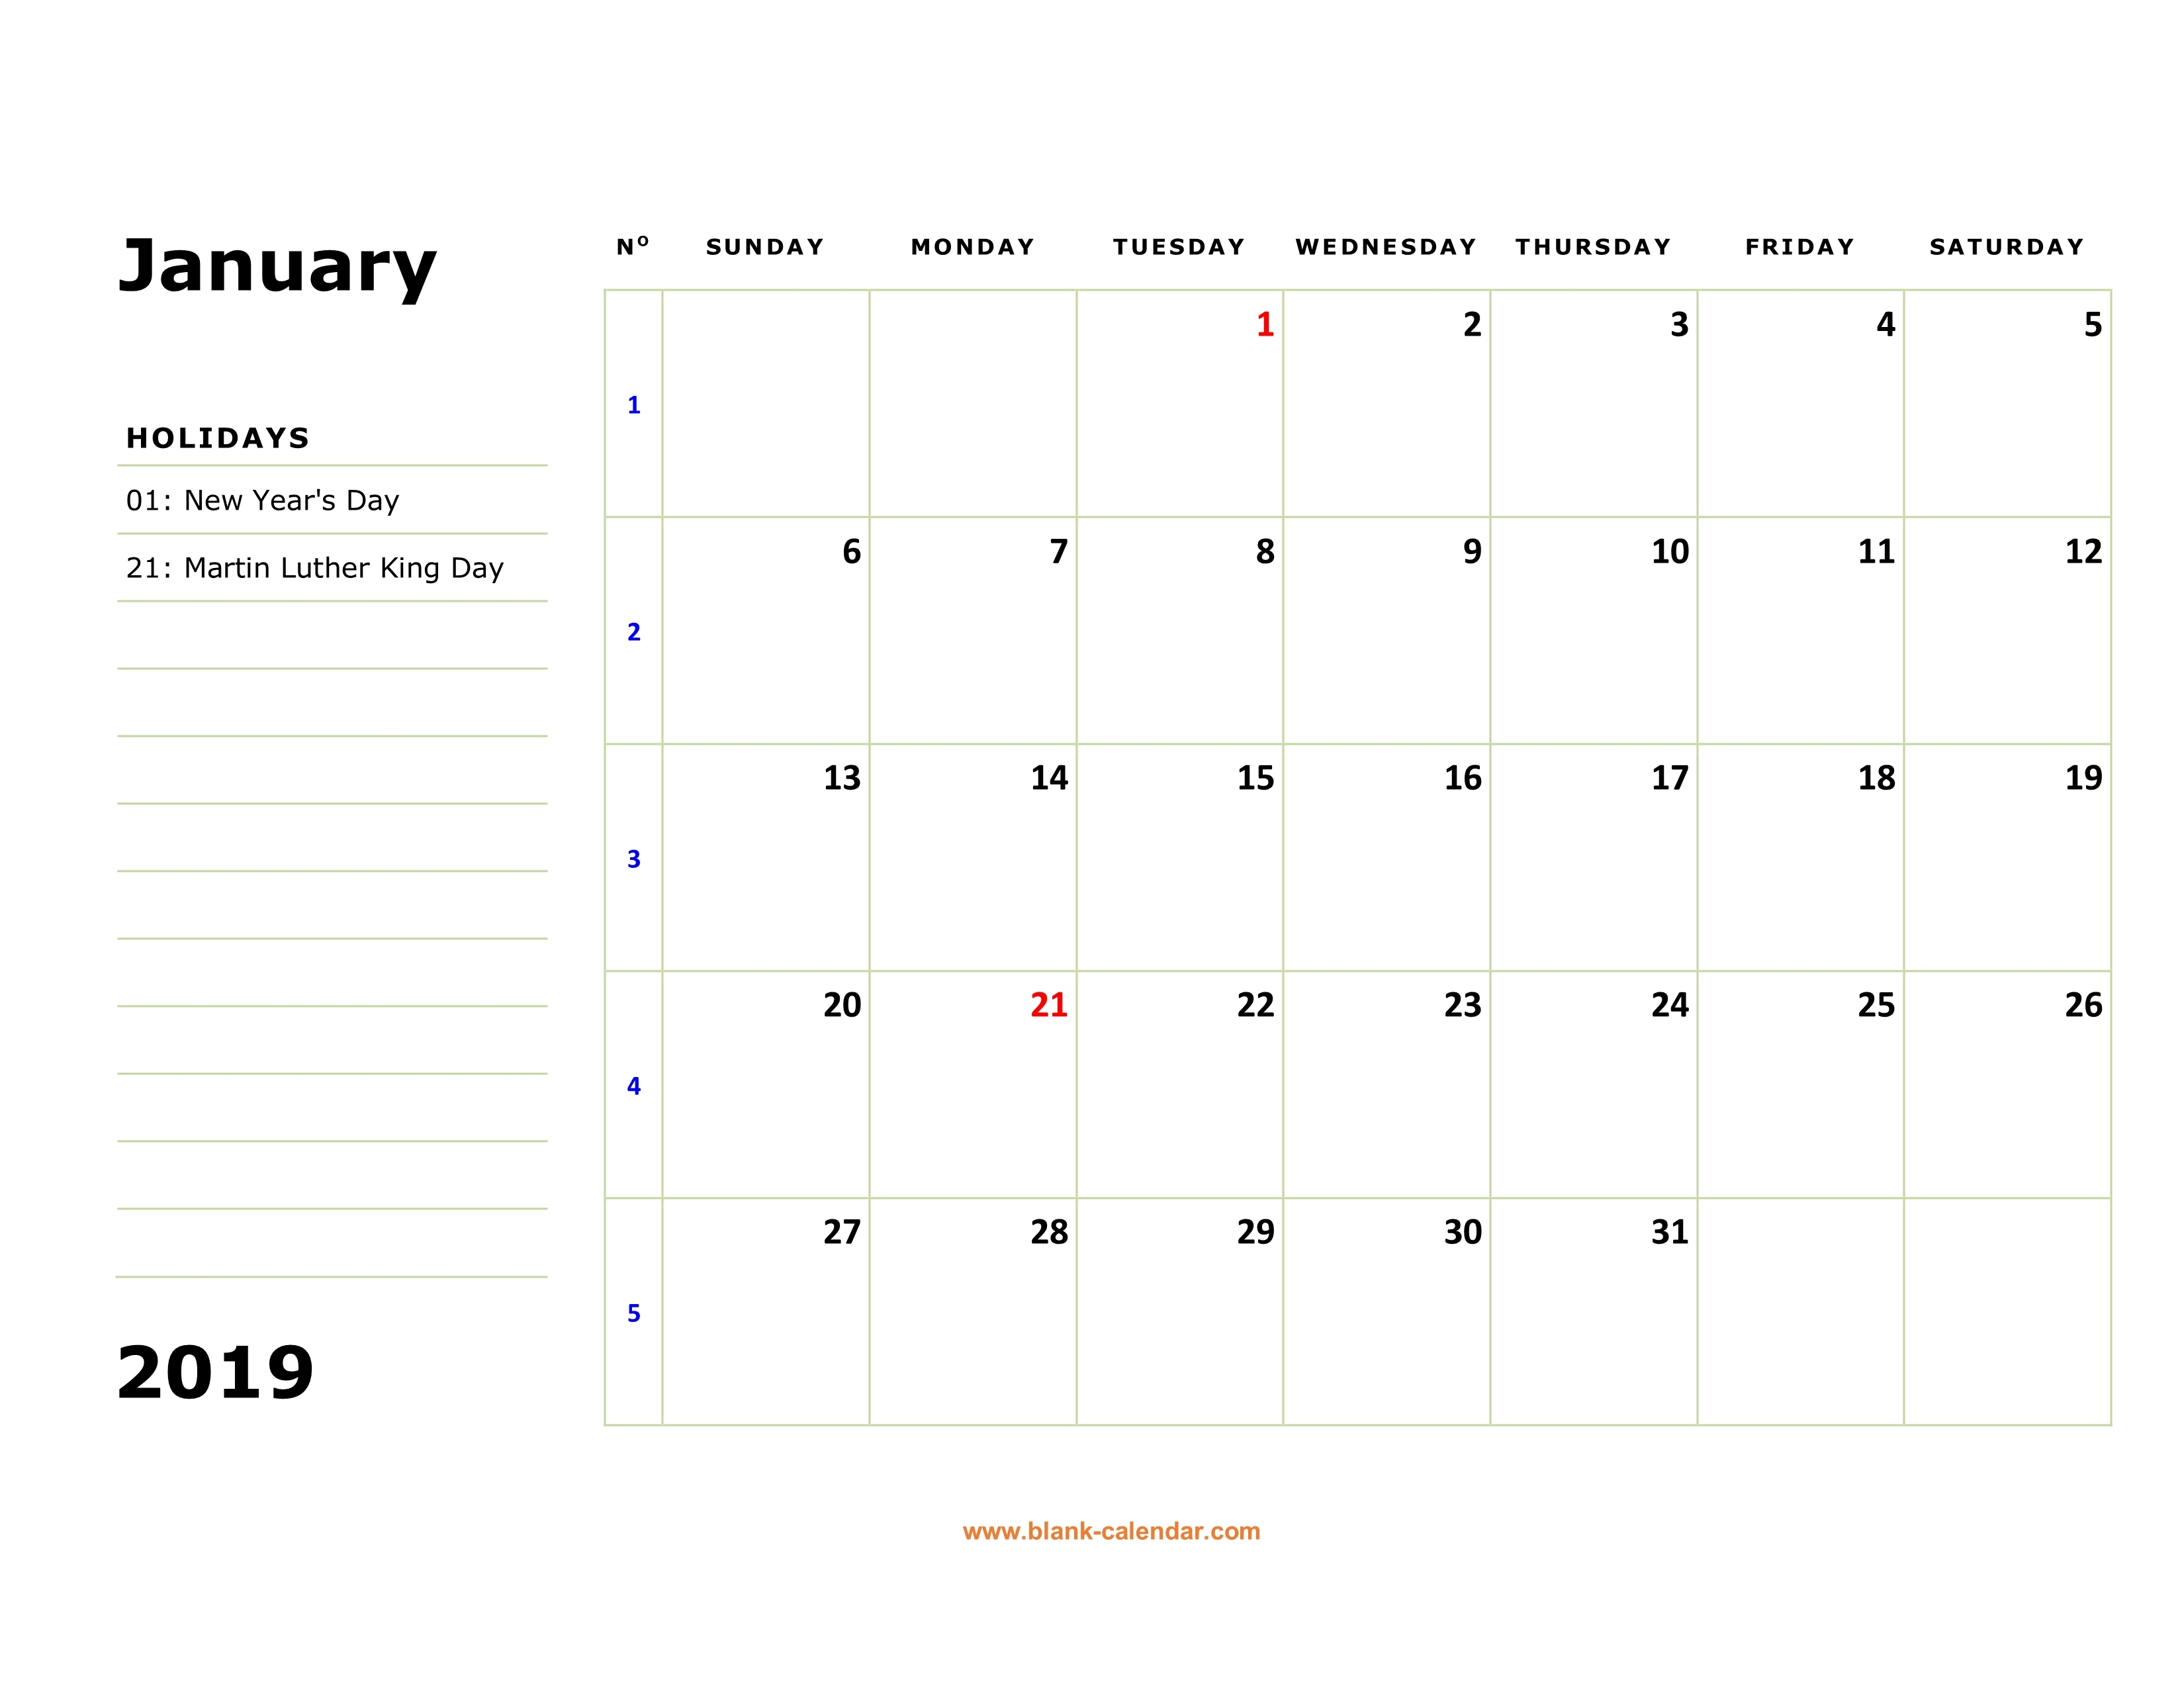 2019 Holiday Calendar Month By Month